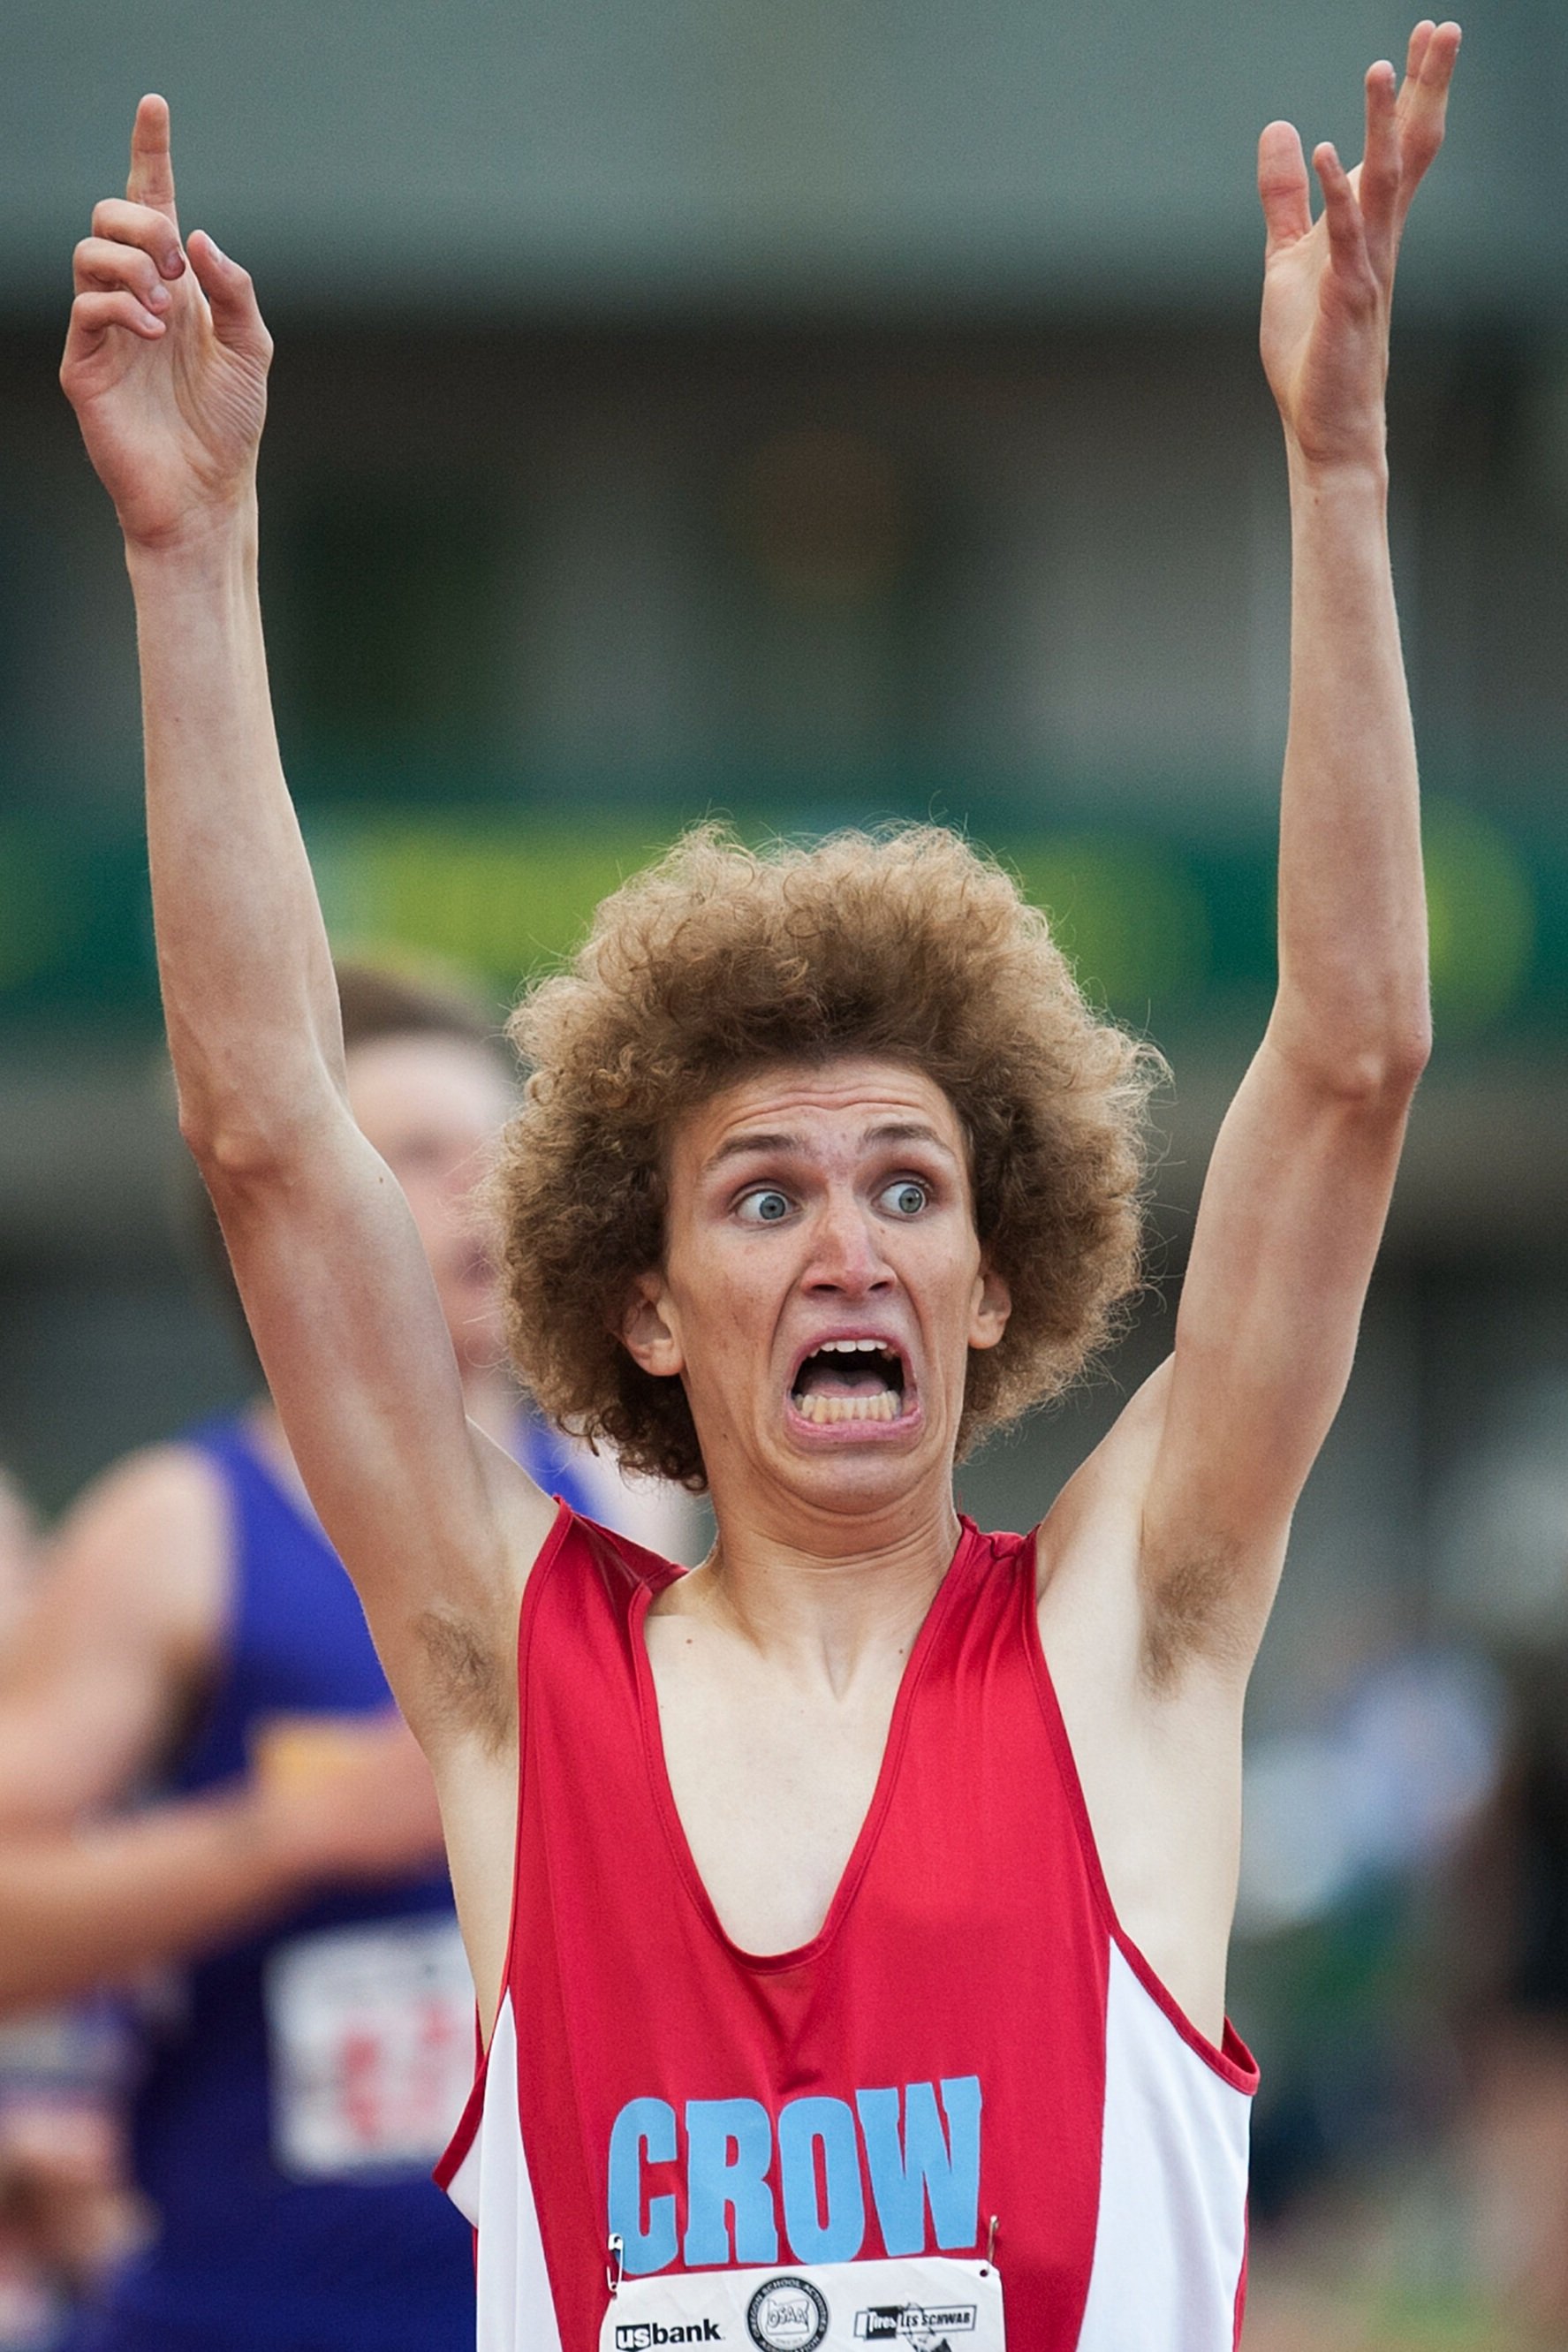  Crow High School athlete Kaelan Recca celebrates after winning the 2A boys 800-meter run during the state championships at Hayward Field on Friday, May 22, 2015, in Eugene, Oregon.  